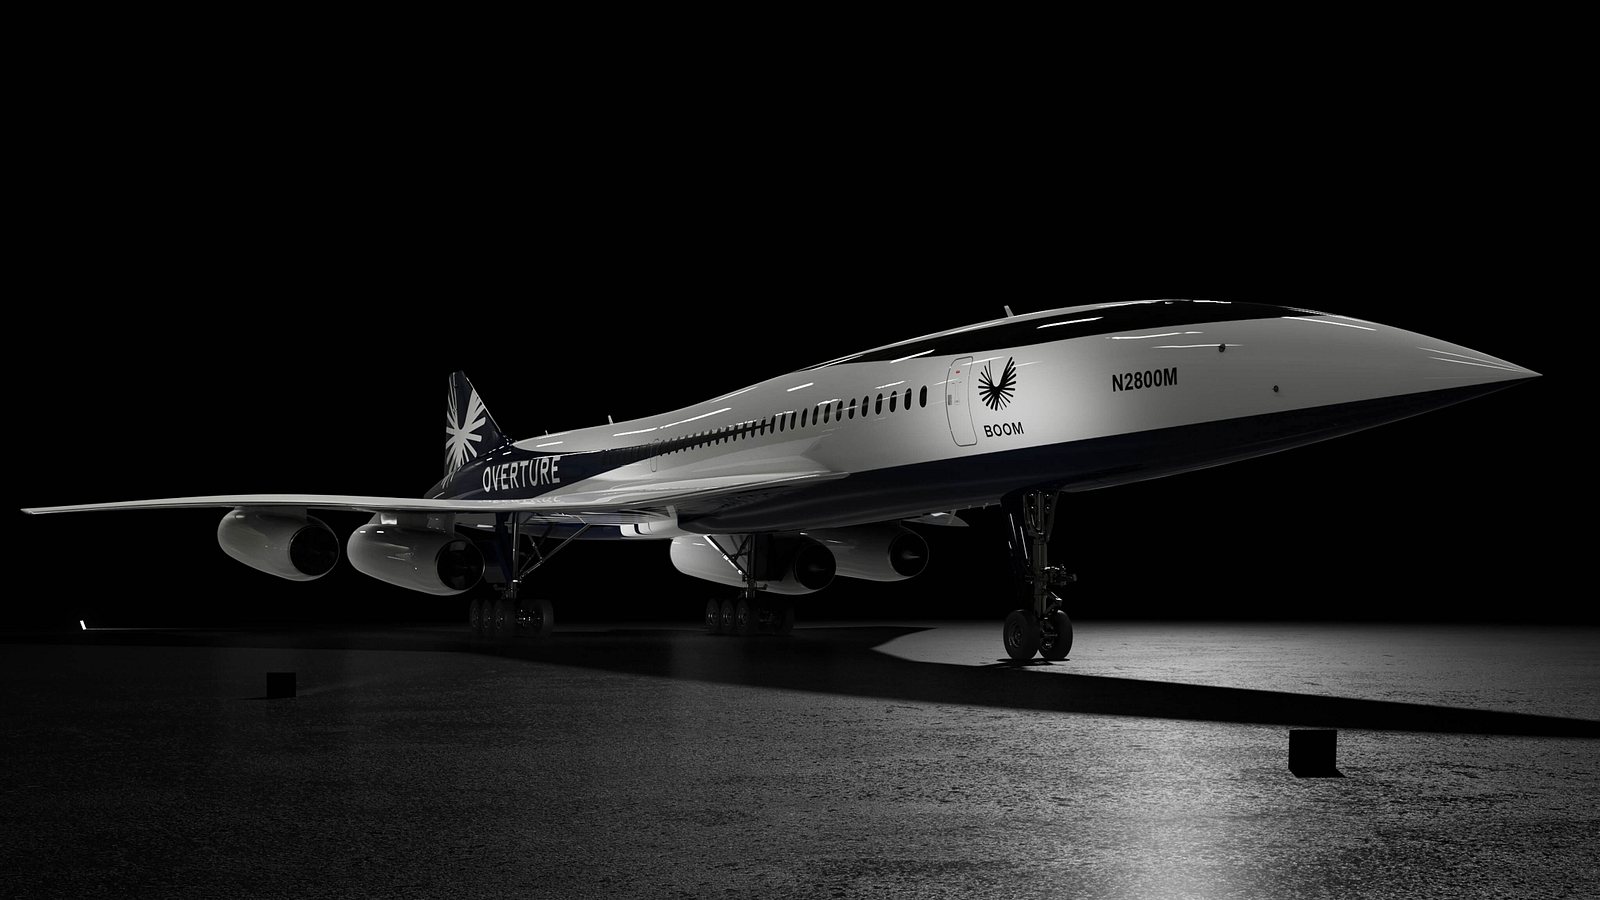 Boom Supersonic reveals new design for its 1,300mph 'sculpted for speed' passenger plane that's 'kind of like if Concorde and a 747 had a baby'